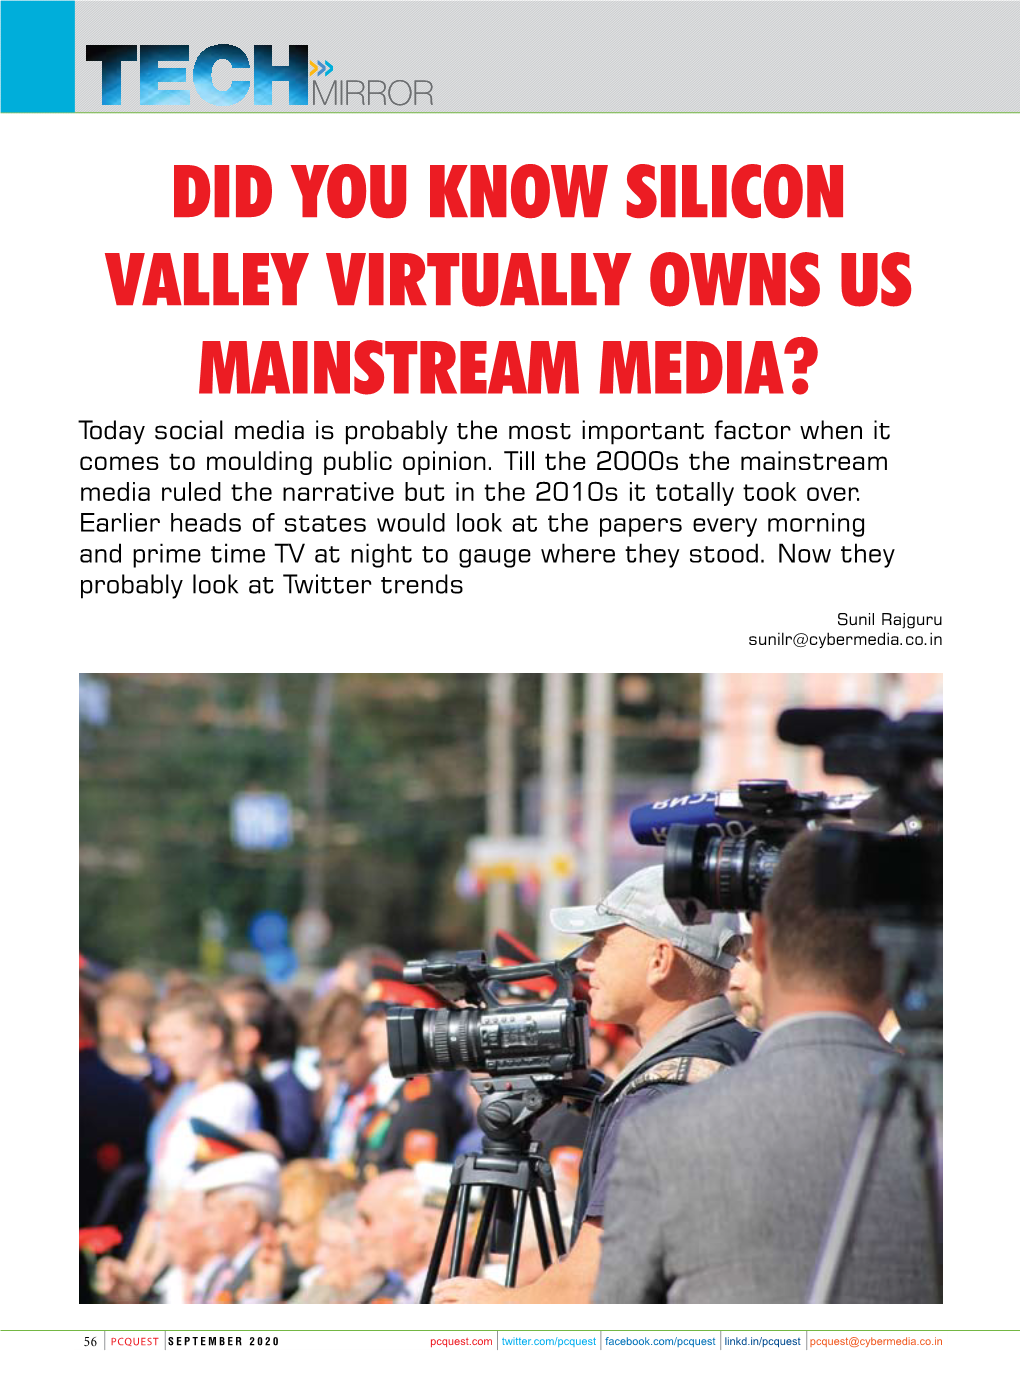 DID YOU KNOW SILICON VALLEY VIRTUALLY OWNS US MAINSTREAM MEDIA? Today Social Media Is Probably the Most Important Factor When It Comes to Moulding Public Opinion